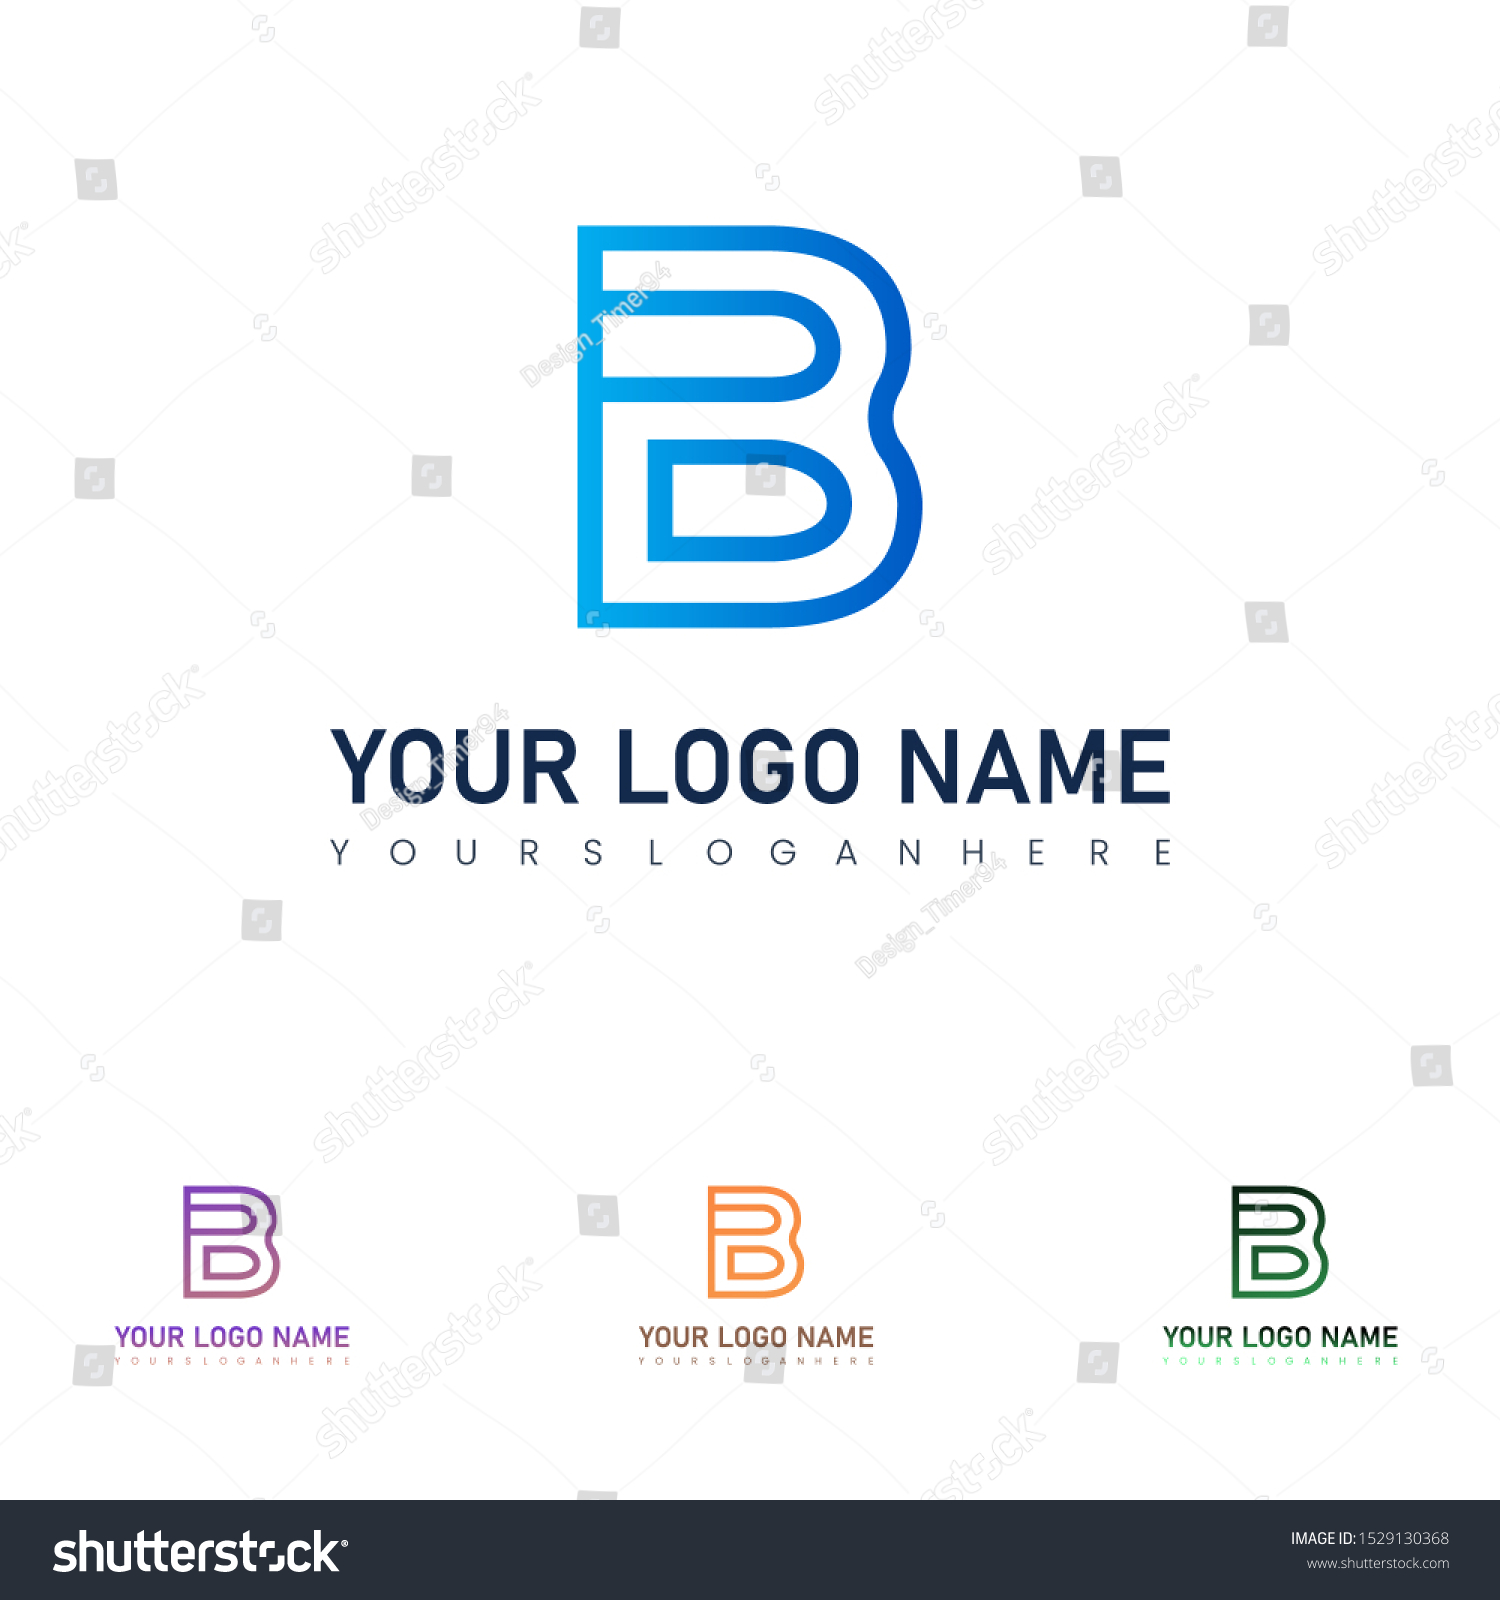 B Letter Logo Images Stock Photos Stock Vector (Royalty Free ...